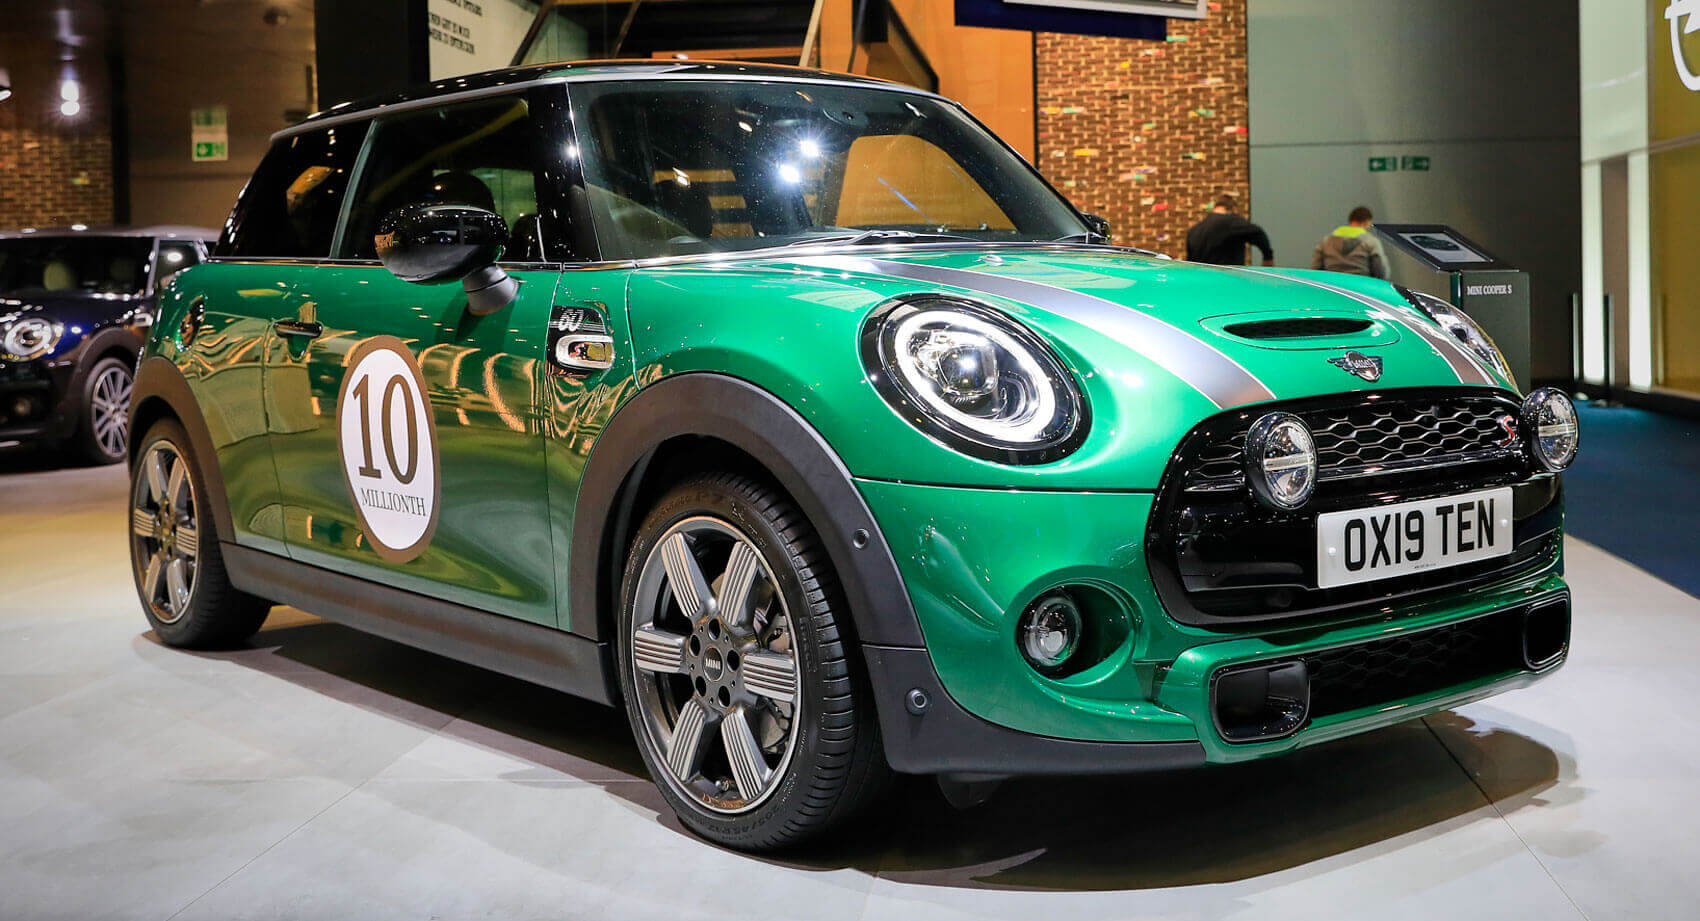 Presented in British Racing Green with Black Bonnet Stripes, this 2021, Mini Coopers